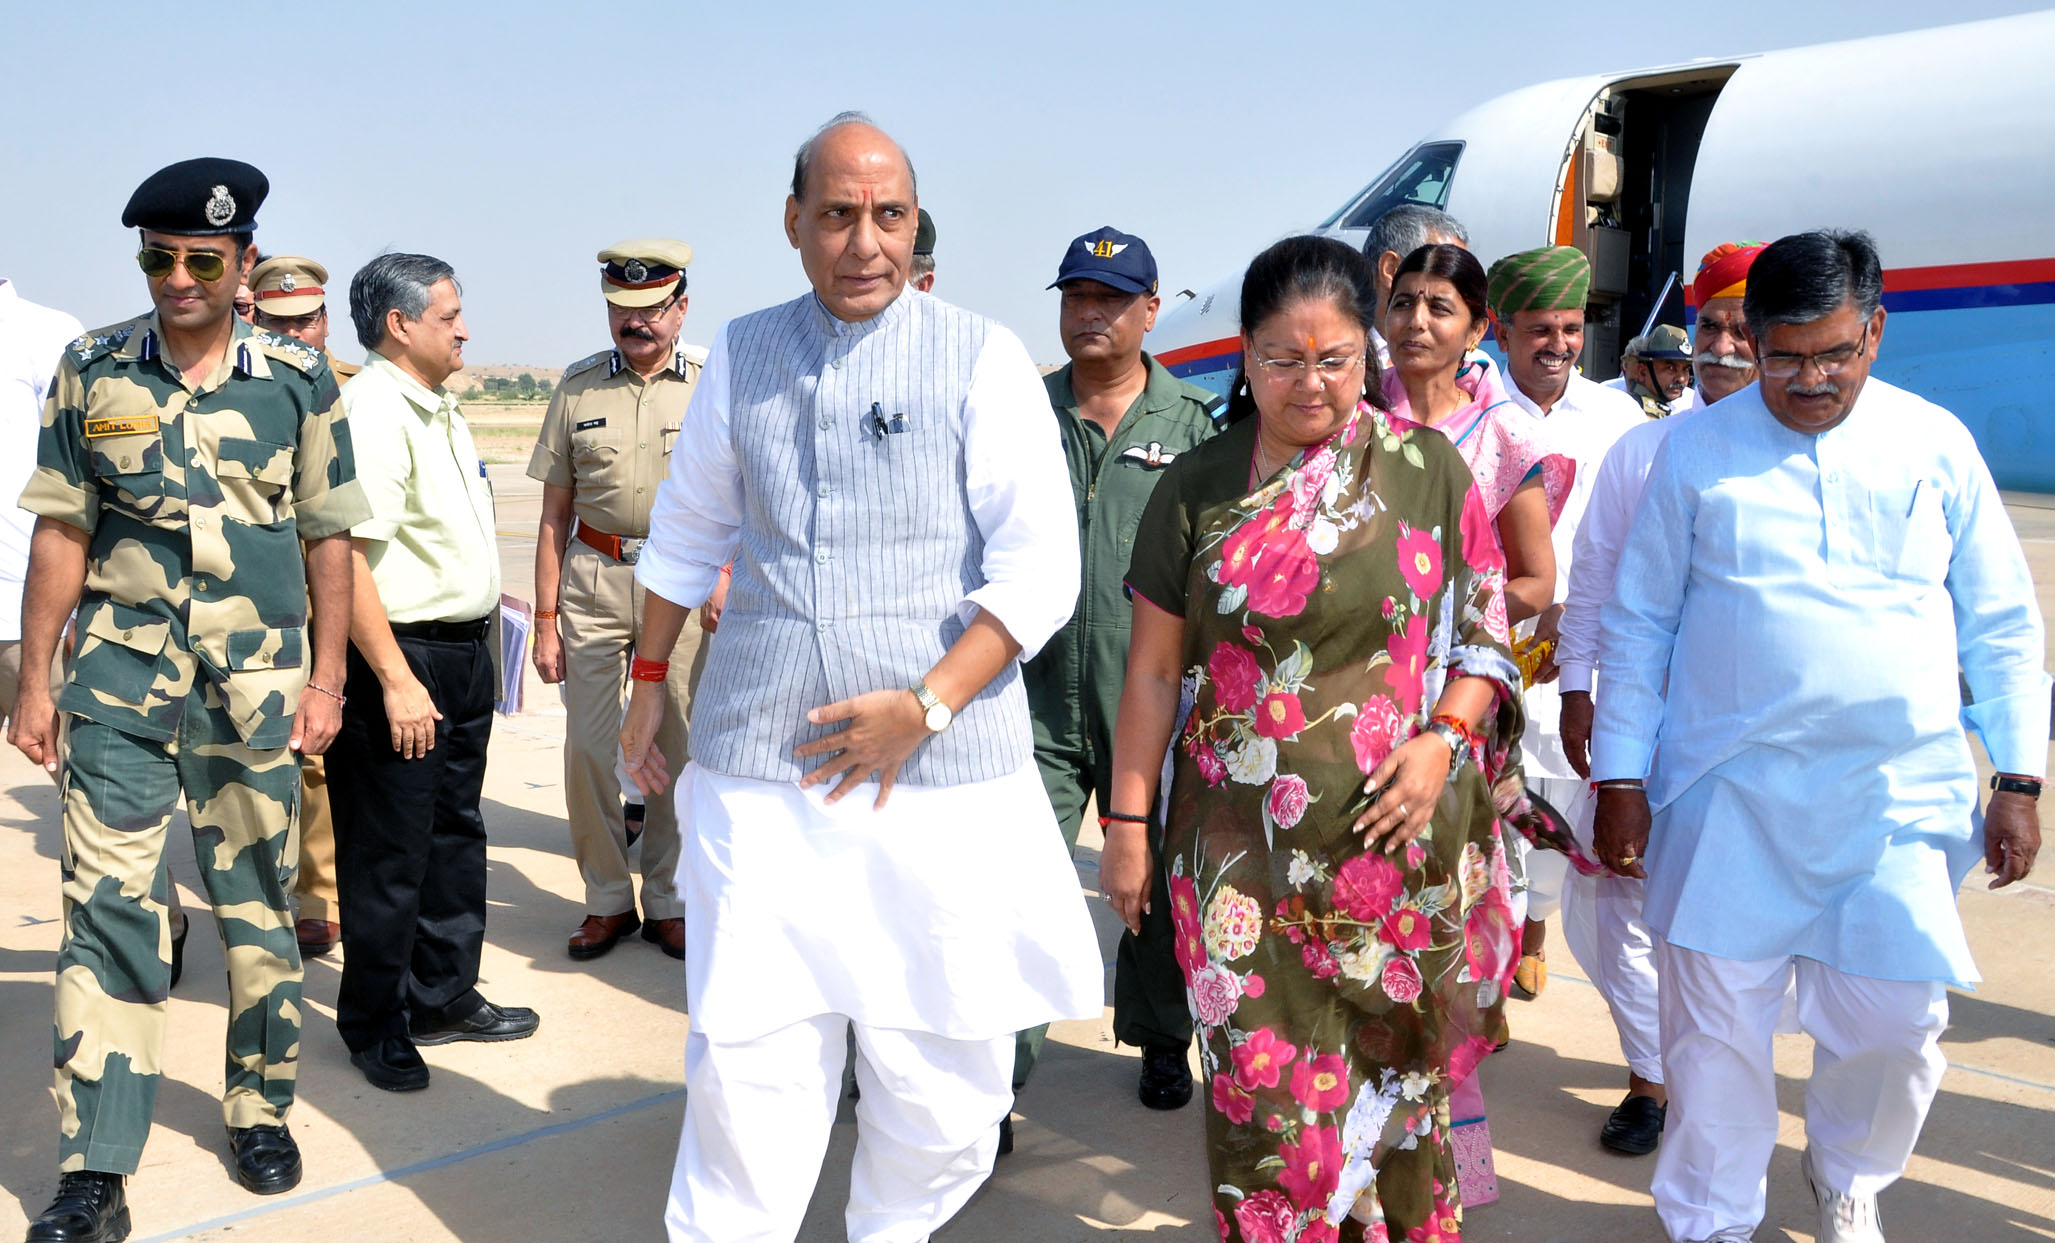 The Union Home Minister, Shri Rajnath Singh being received by the Chief Minister of Rajasthan, Smt. Vasundhara Raje Scindia, in Jaisalmer on October 07, 2016.